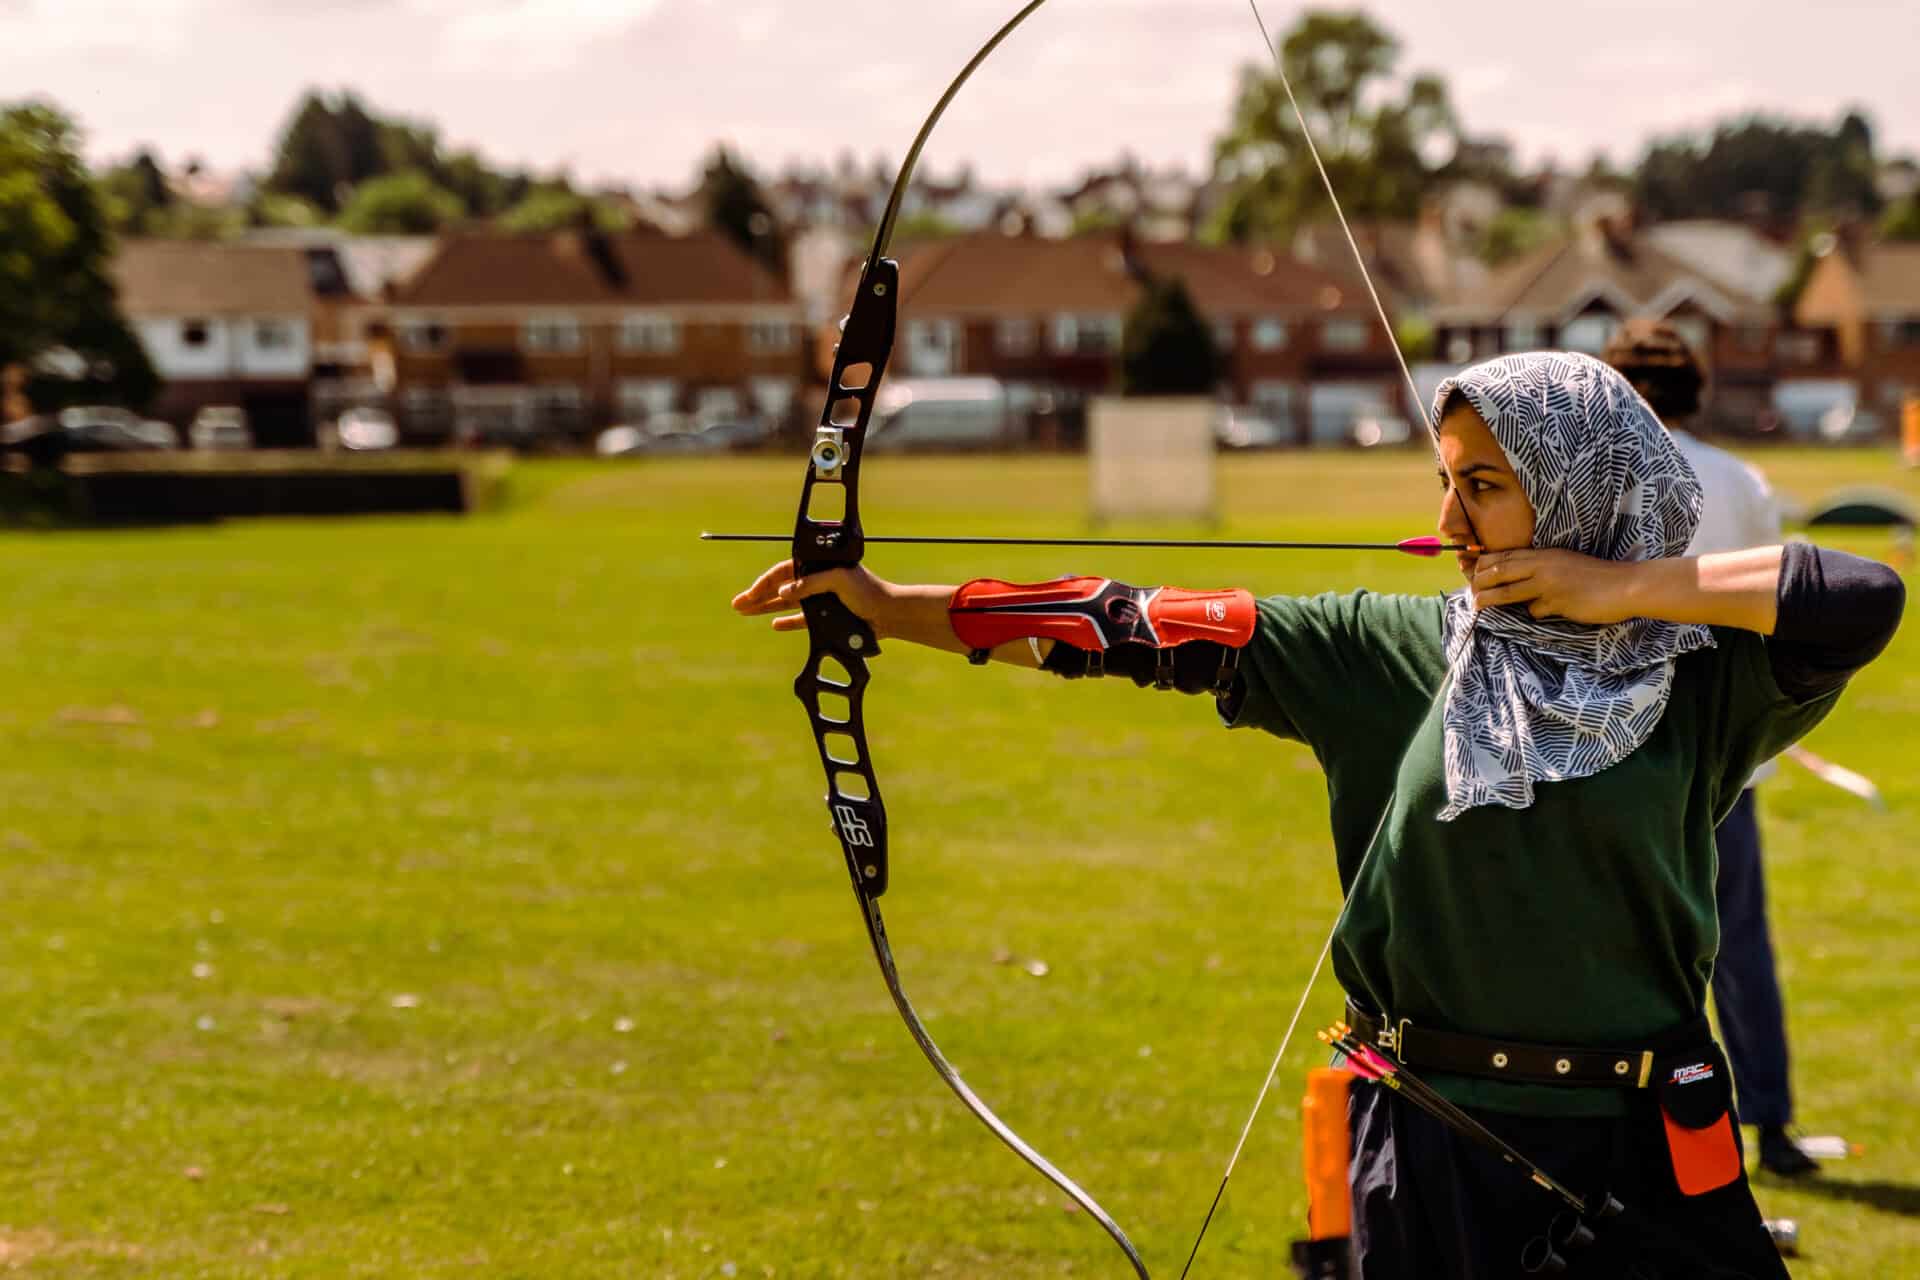 Archery GB awarded £1.6m to tackle inequality in sport